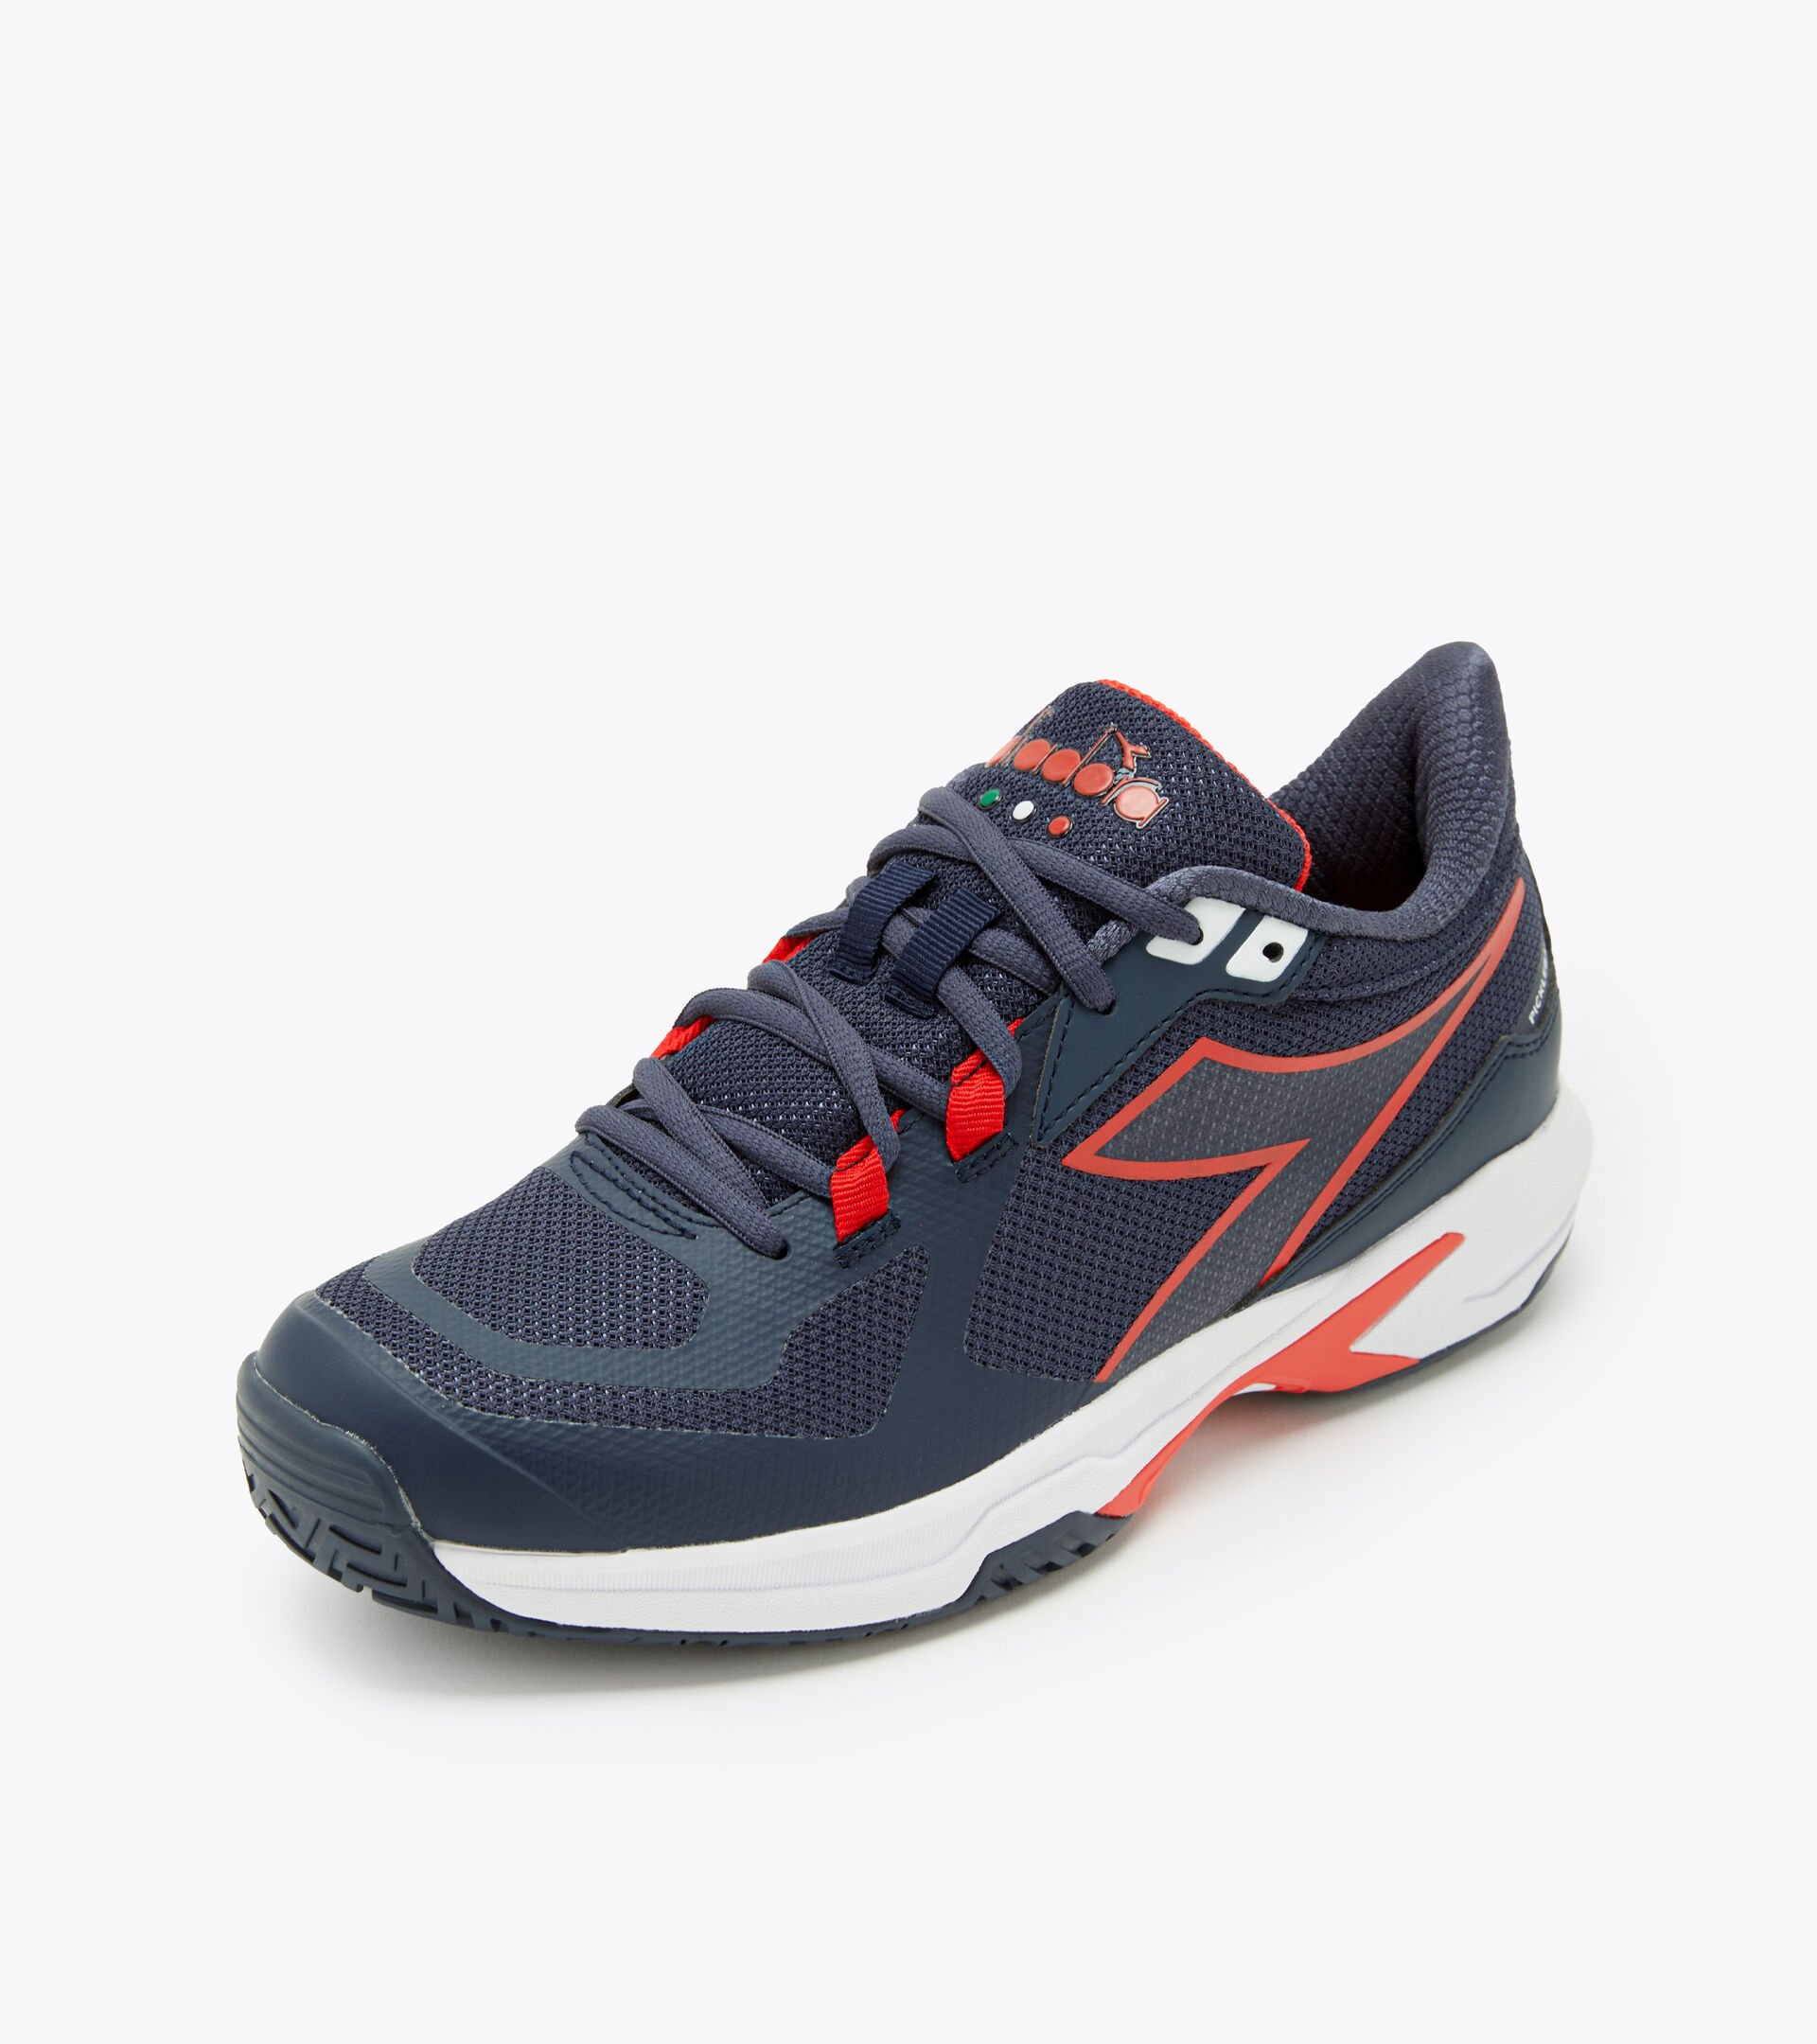 Pickleball shoes for hard surfaces or clay courts - Men TROFEO 2 AG PKL BLUE CORSAIR/WHITE/FIERY RED - Diadora